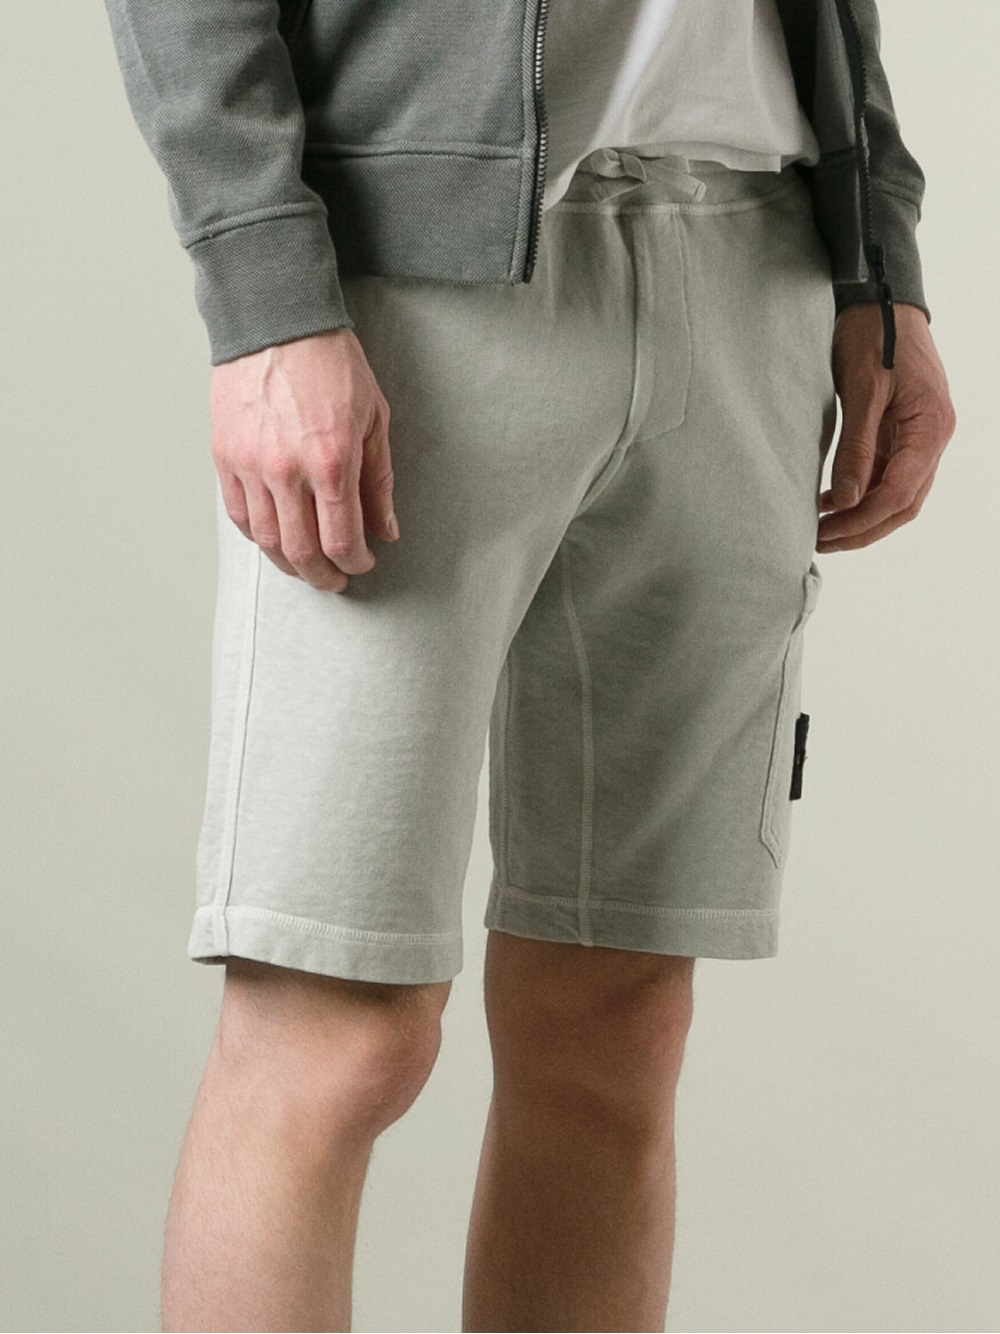 Stone Island Track Shorts in Grey (Gray) for Men - Lyst